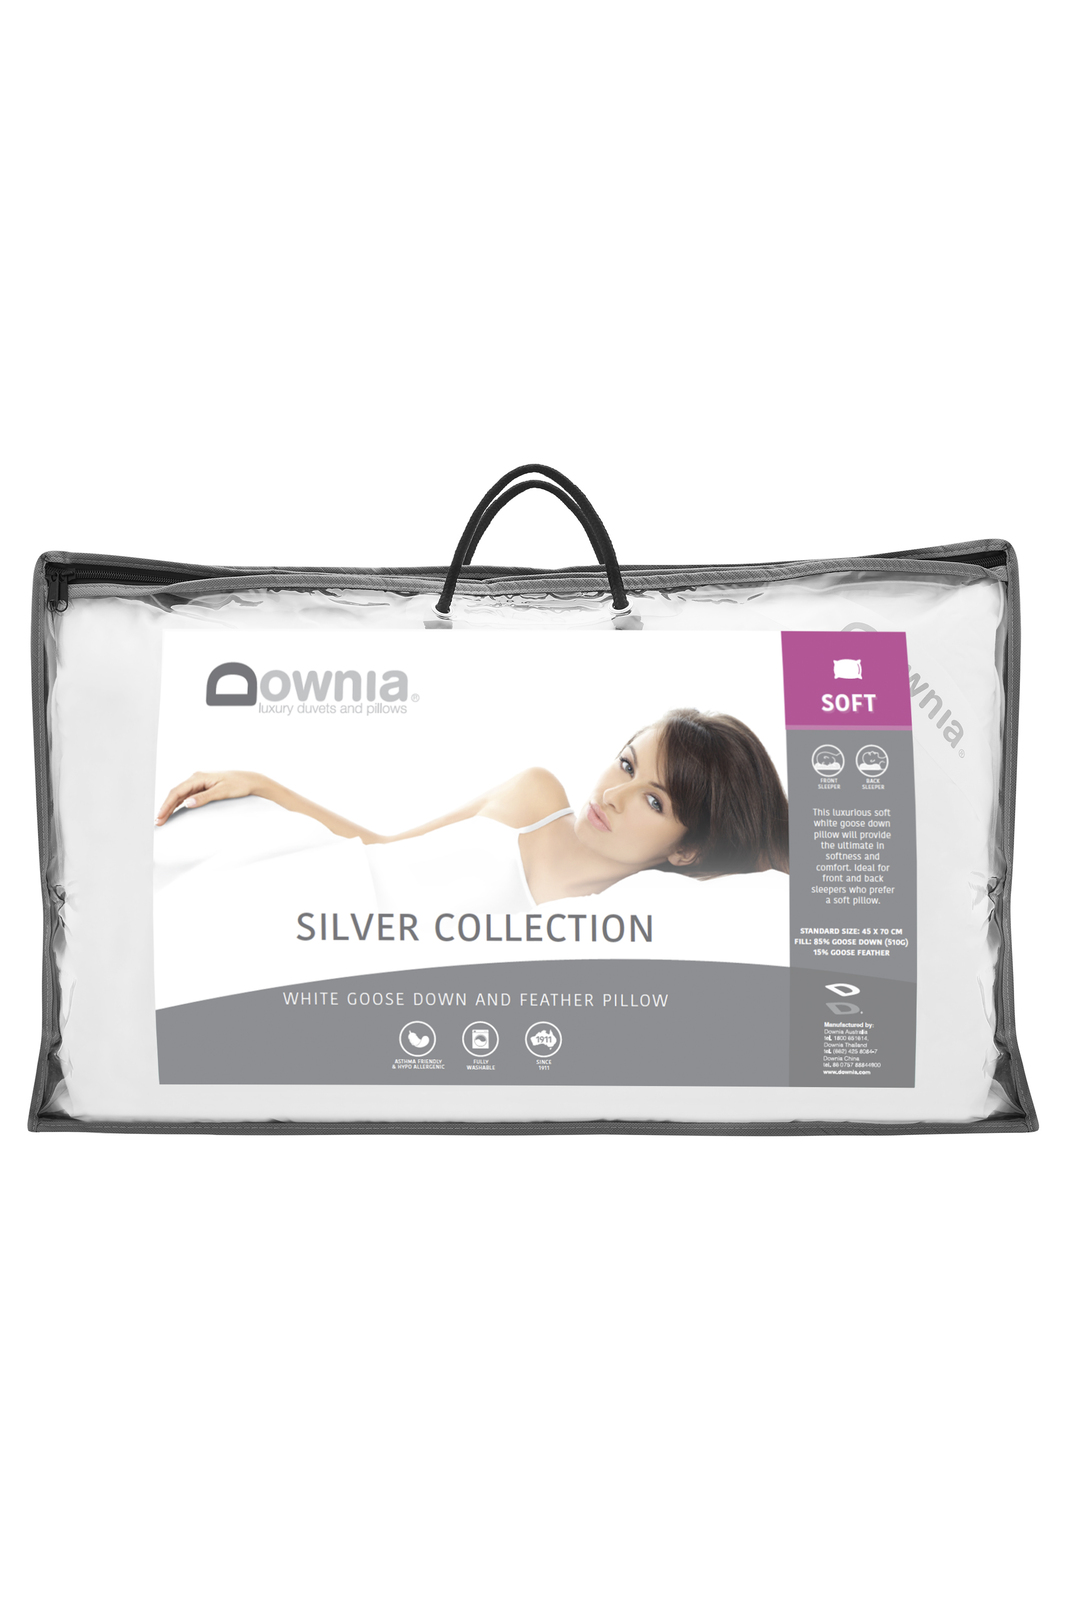 downia silver collection quilt